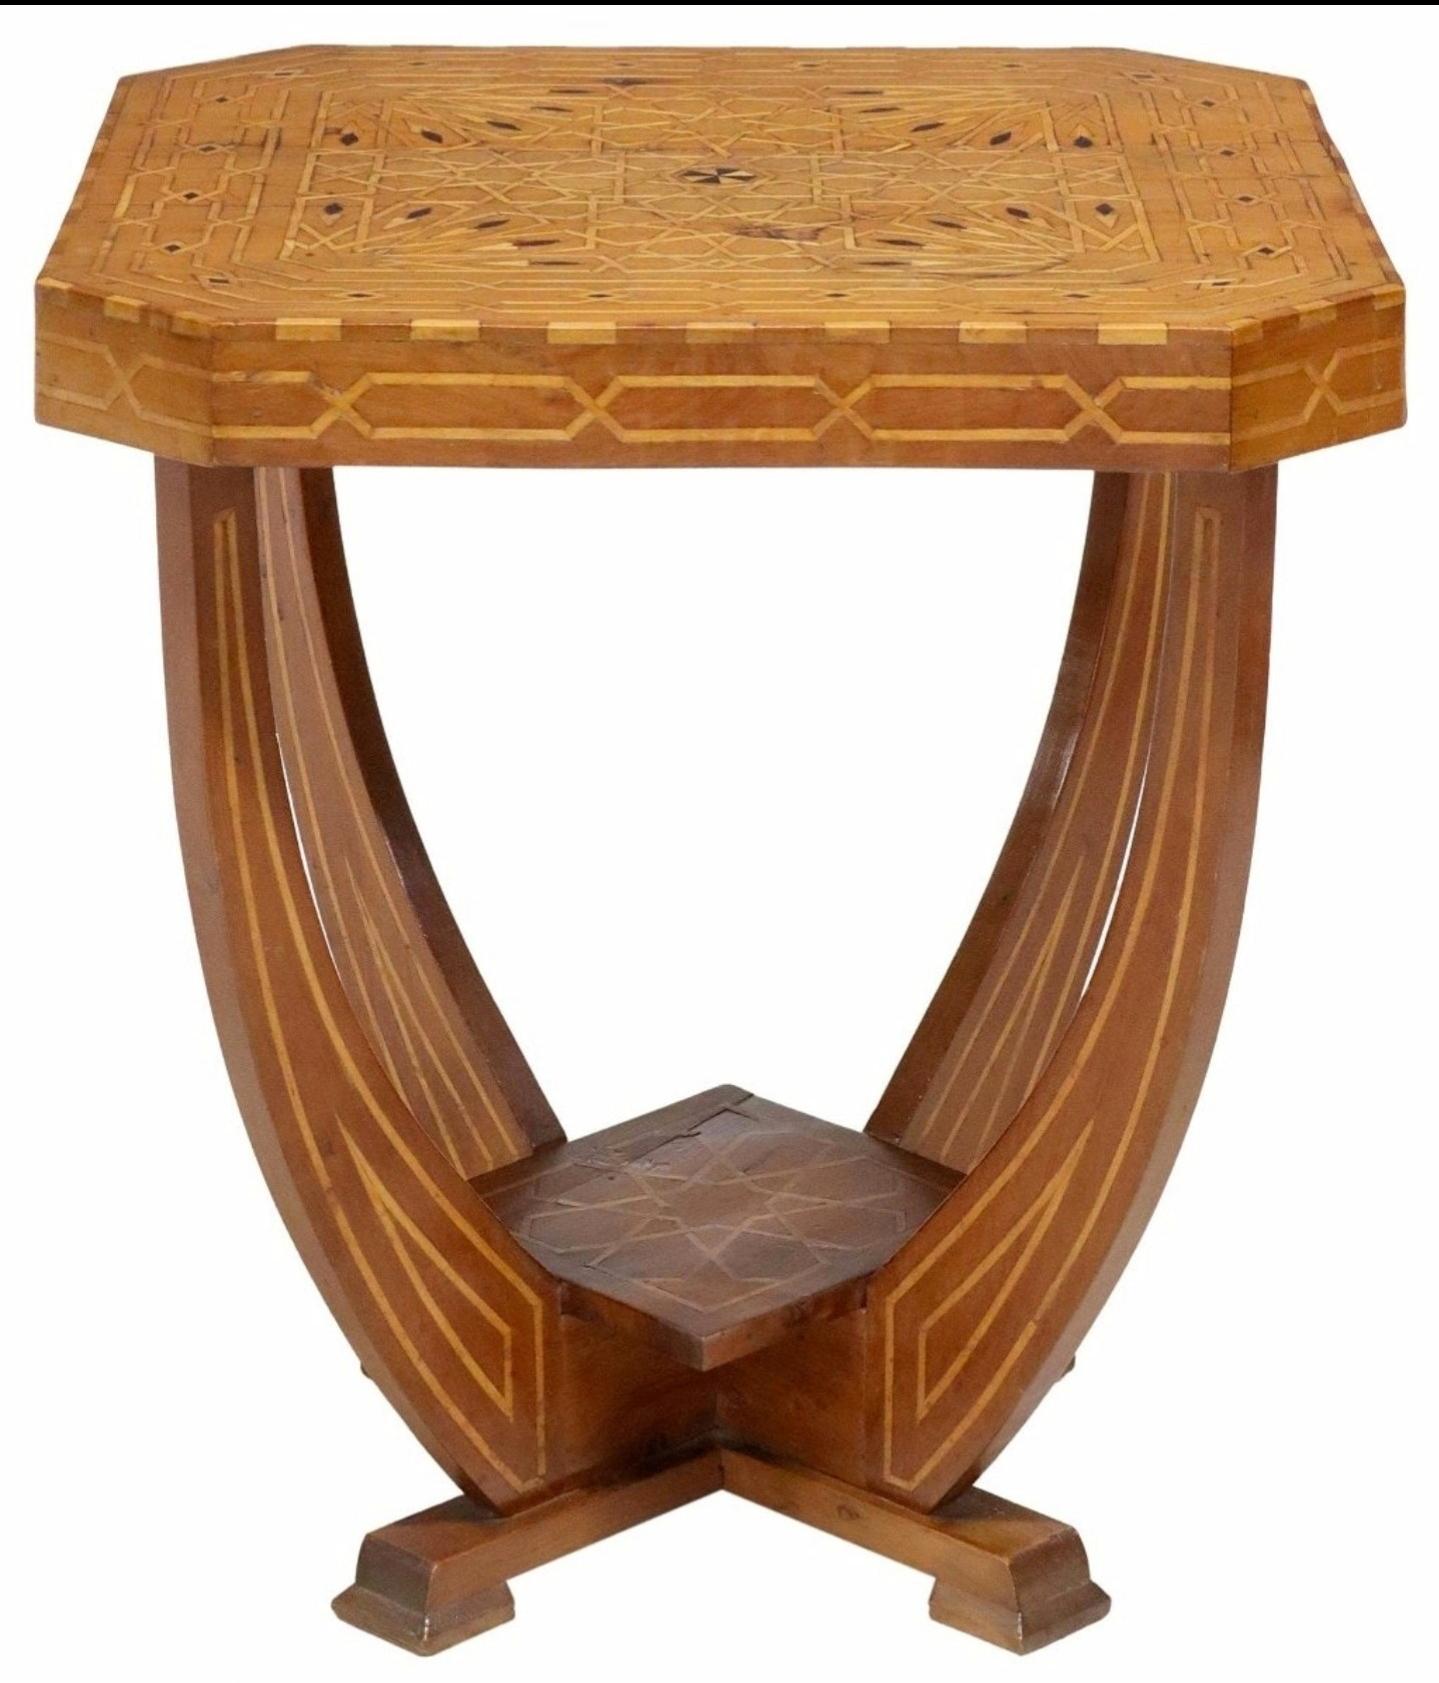 Wood Italian Art Deco Period Parquetry Table circa 1930s  For Sale